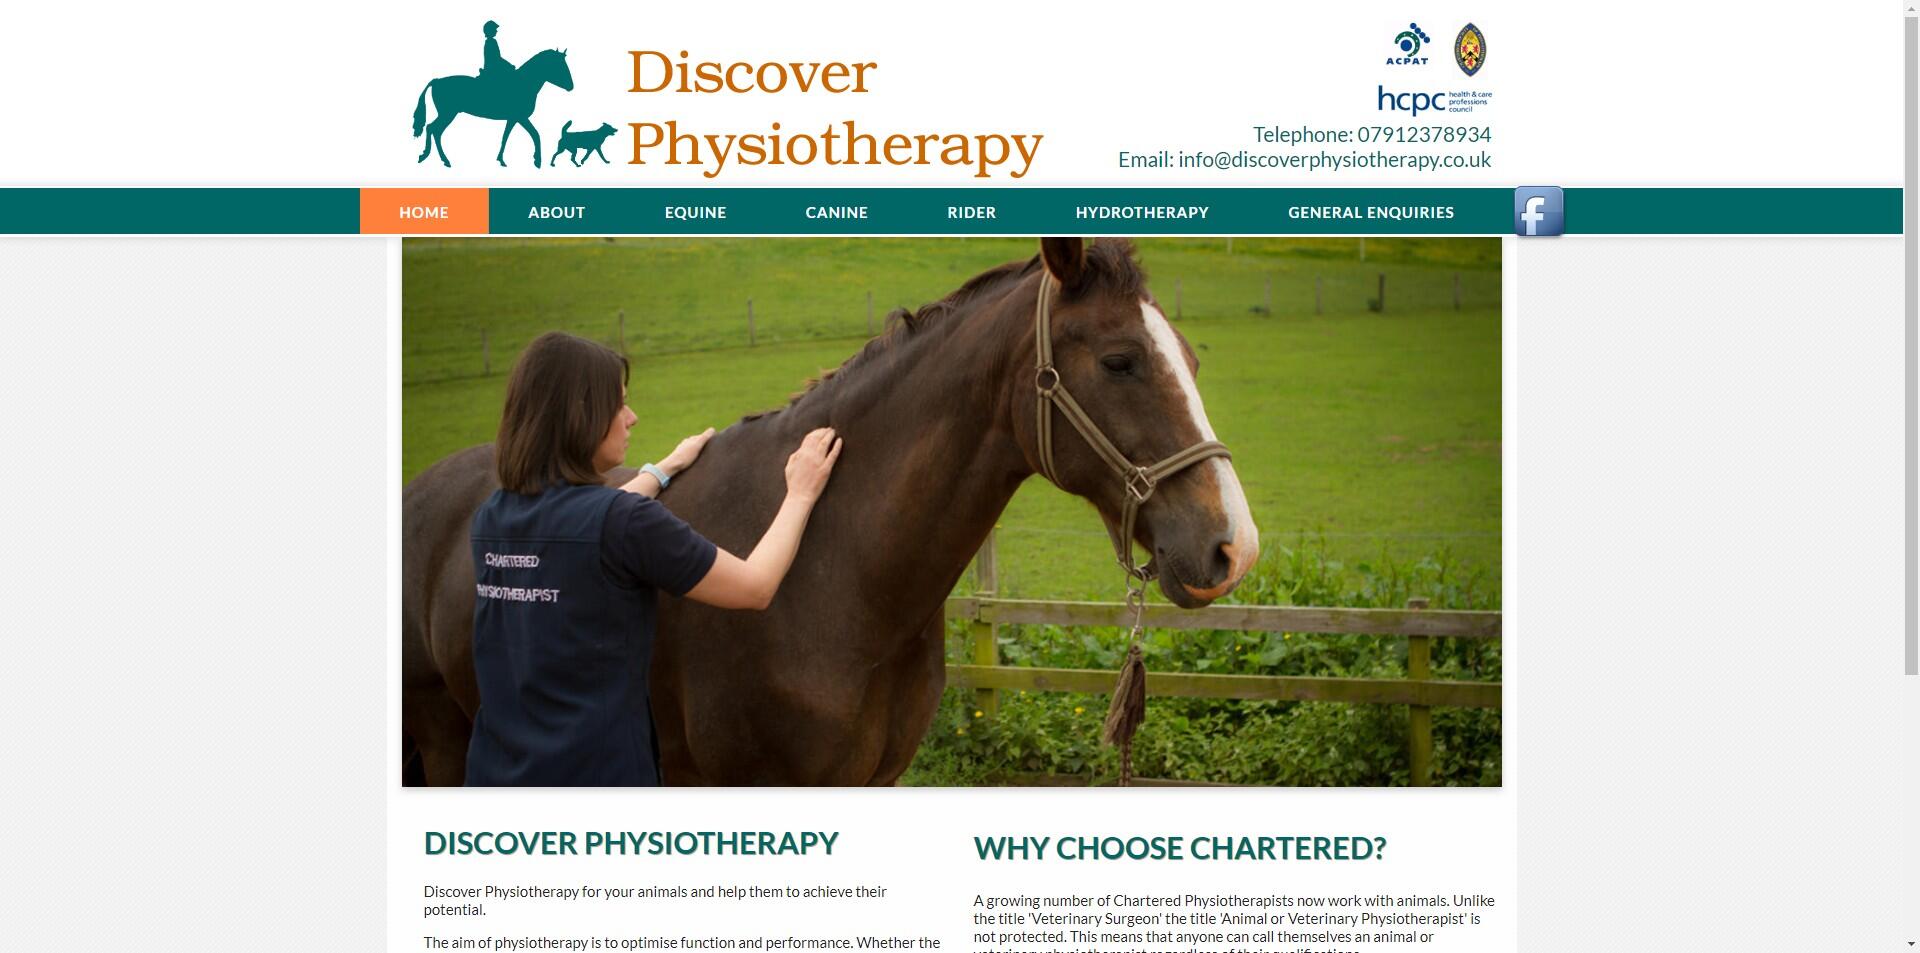 website designed for DISCOVER PHYSIOTHERAPY